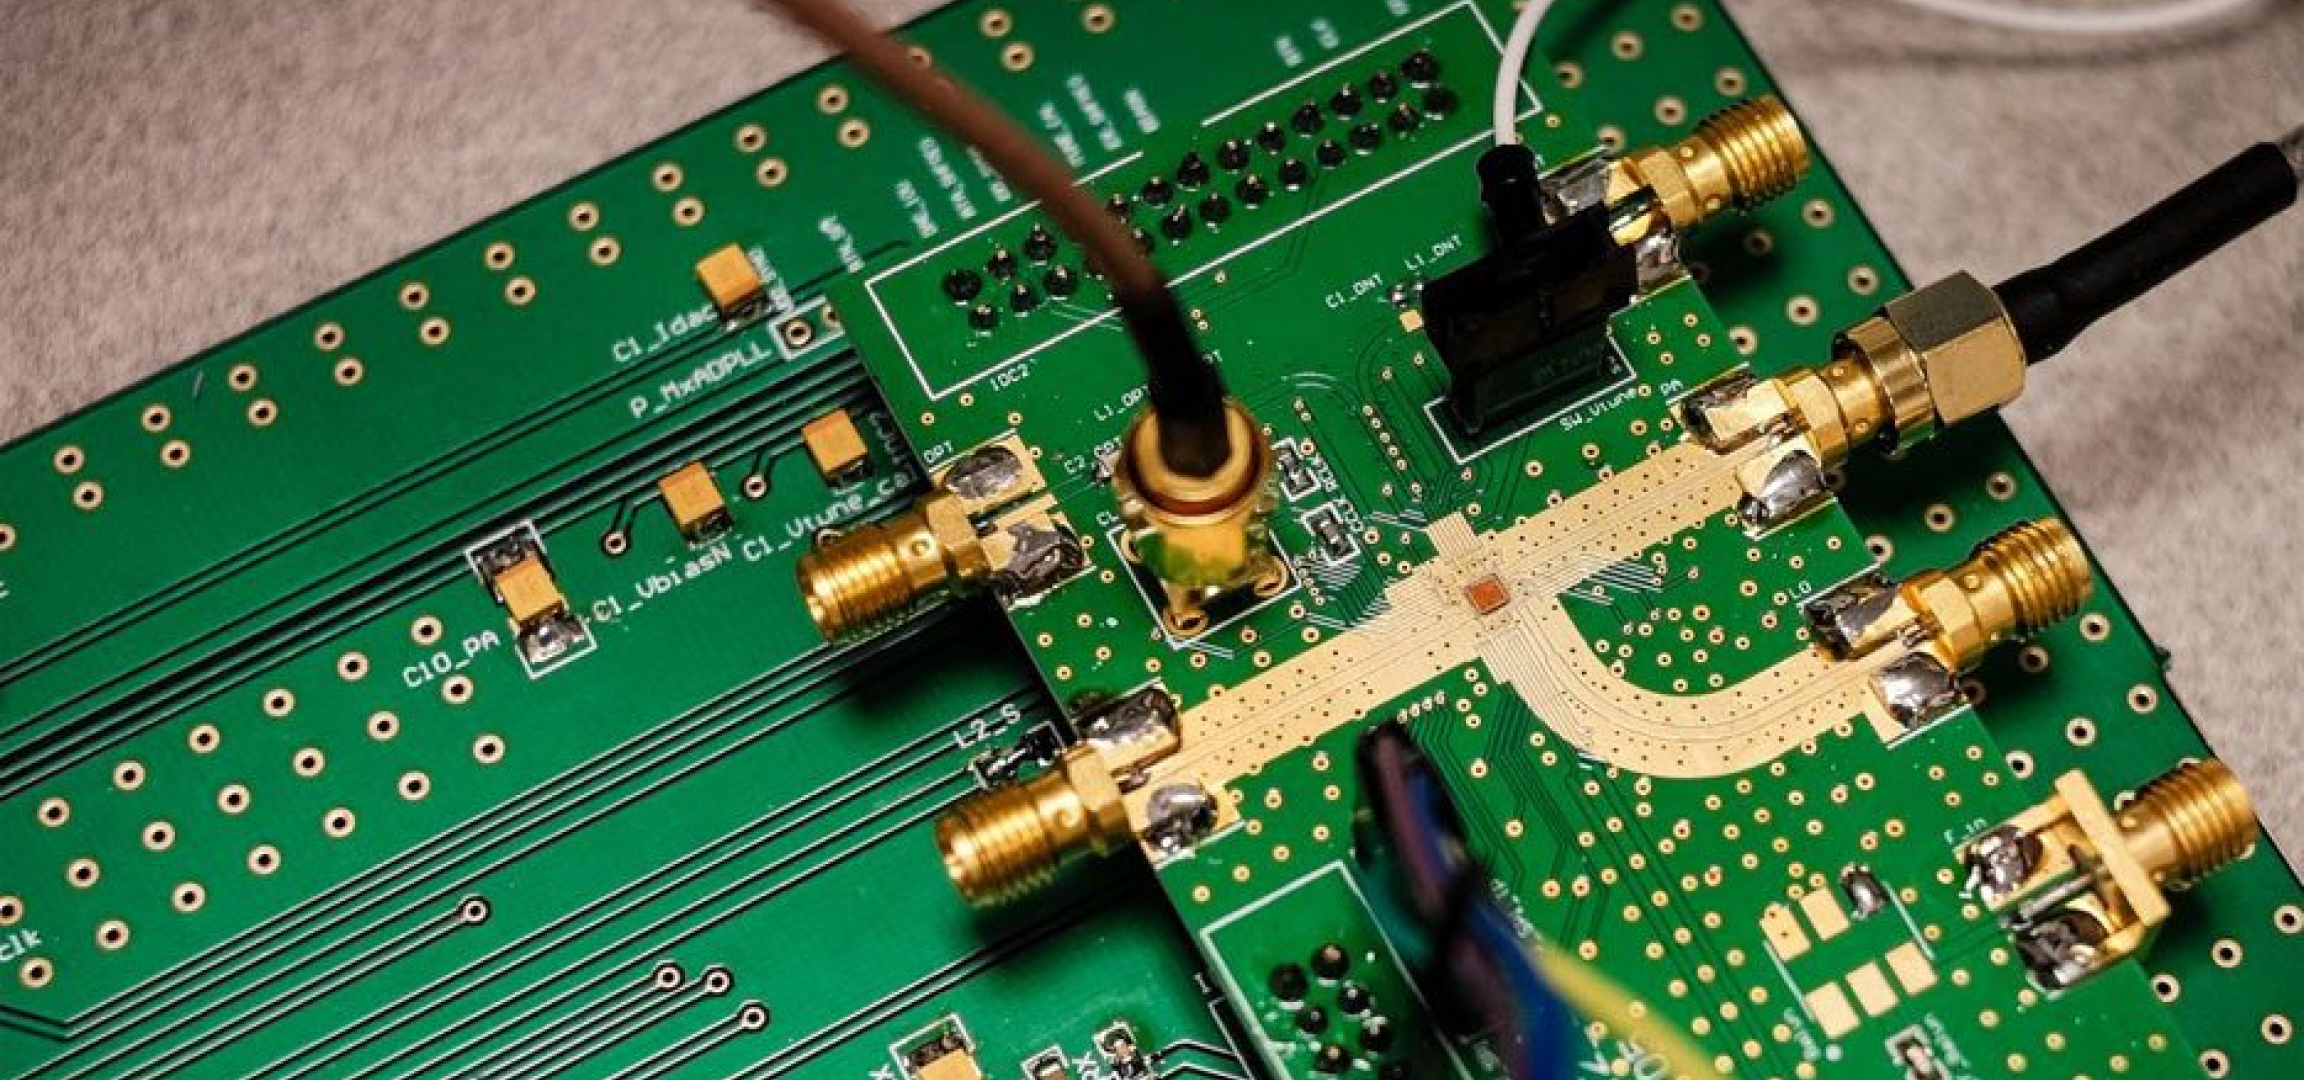 Assembly process of flexible circuit boards